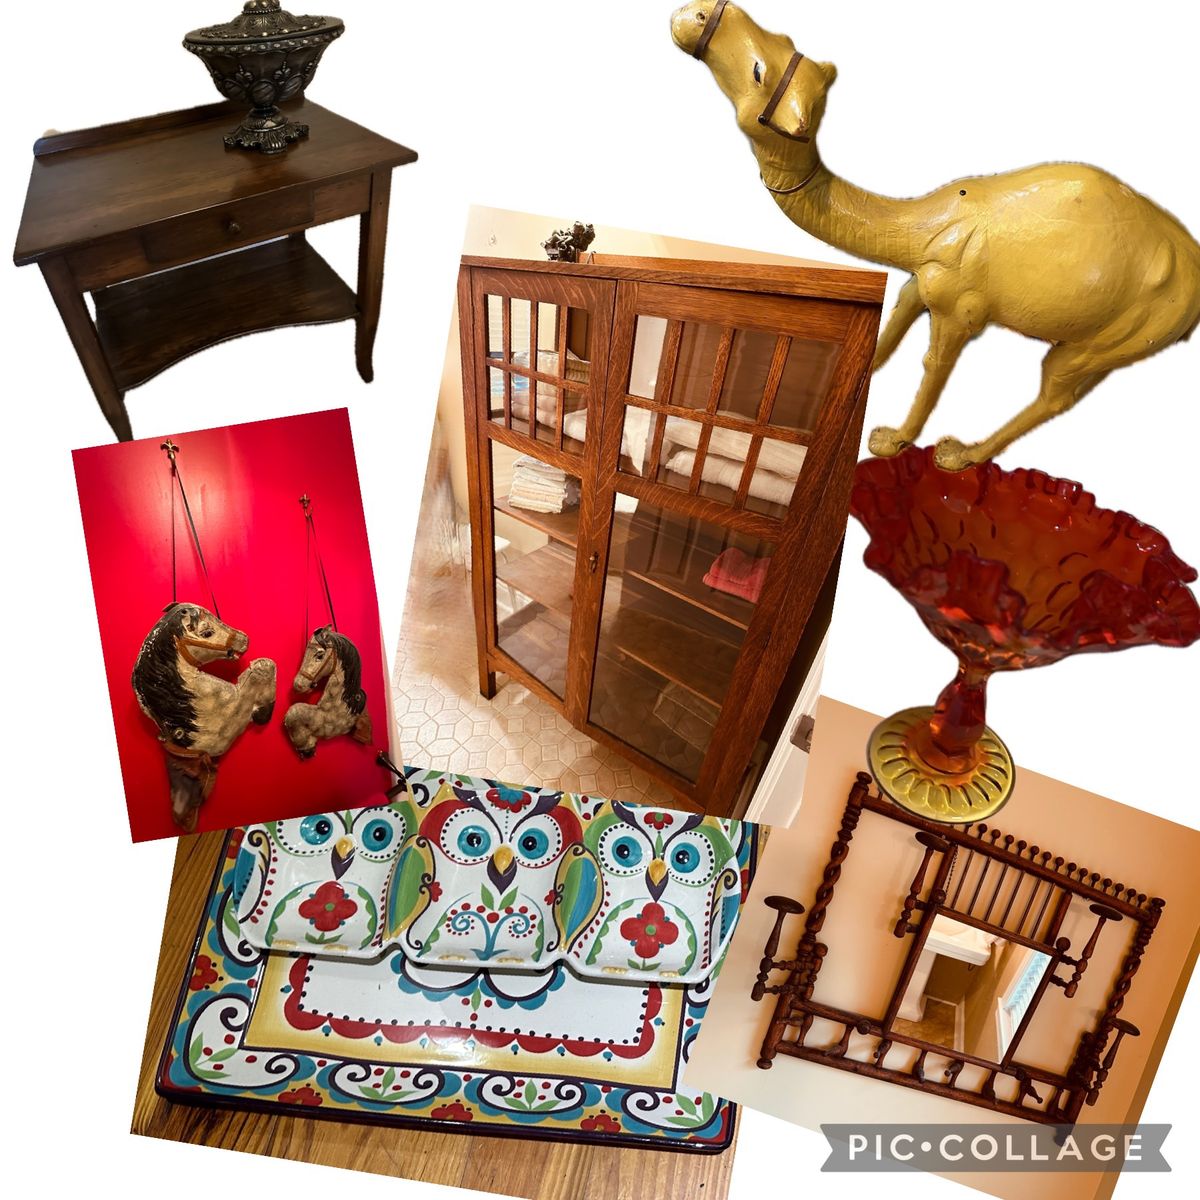 Massive Home Decor and More Sumter Downsizing Sale